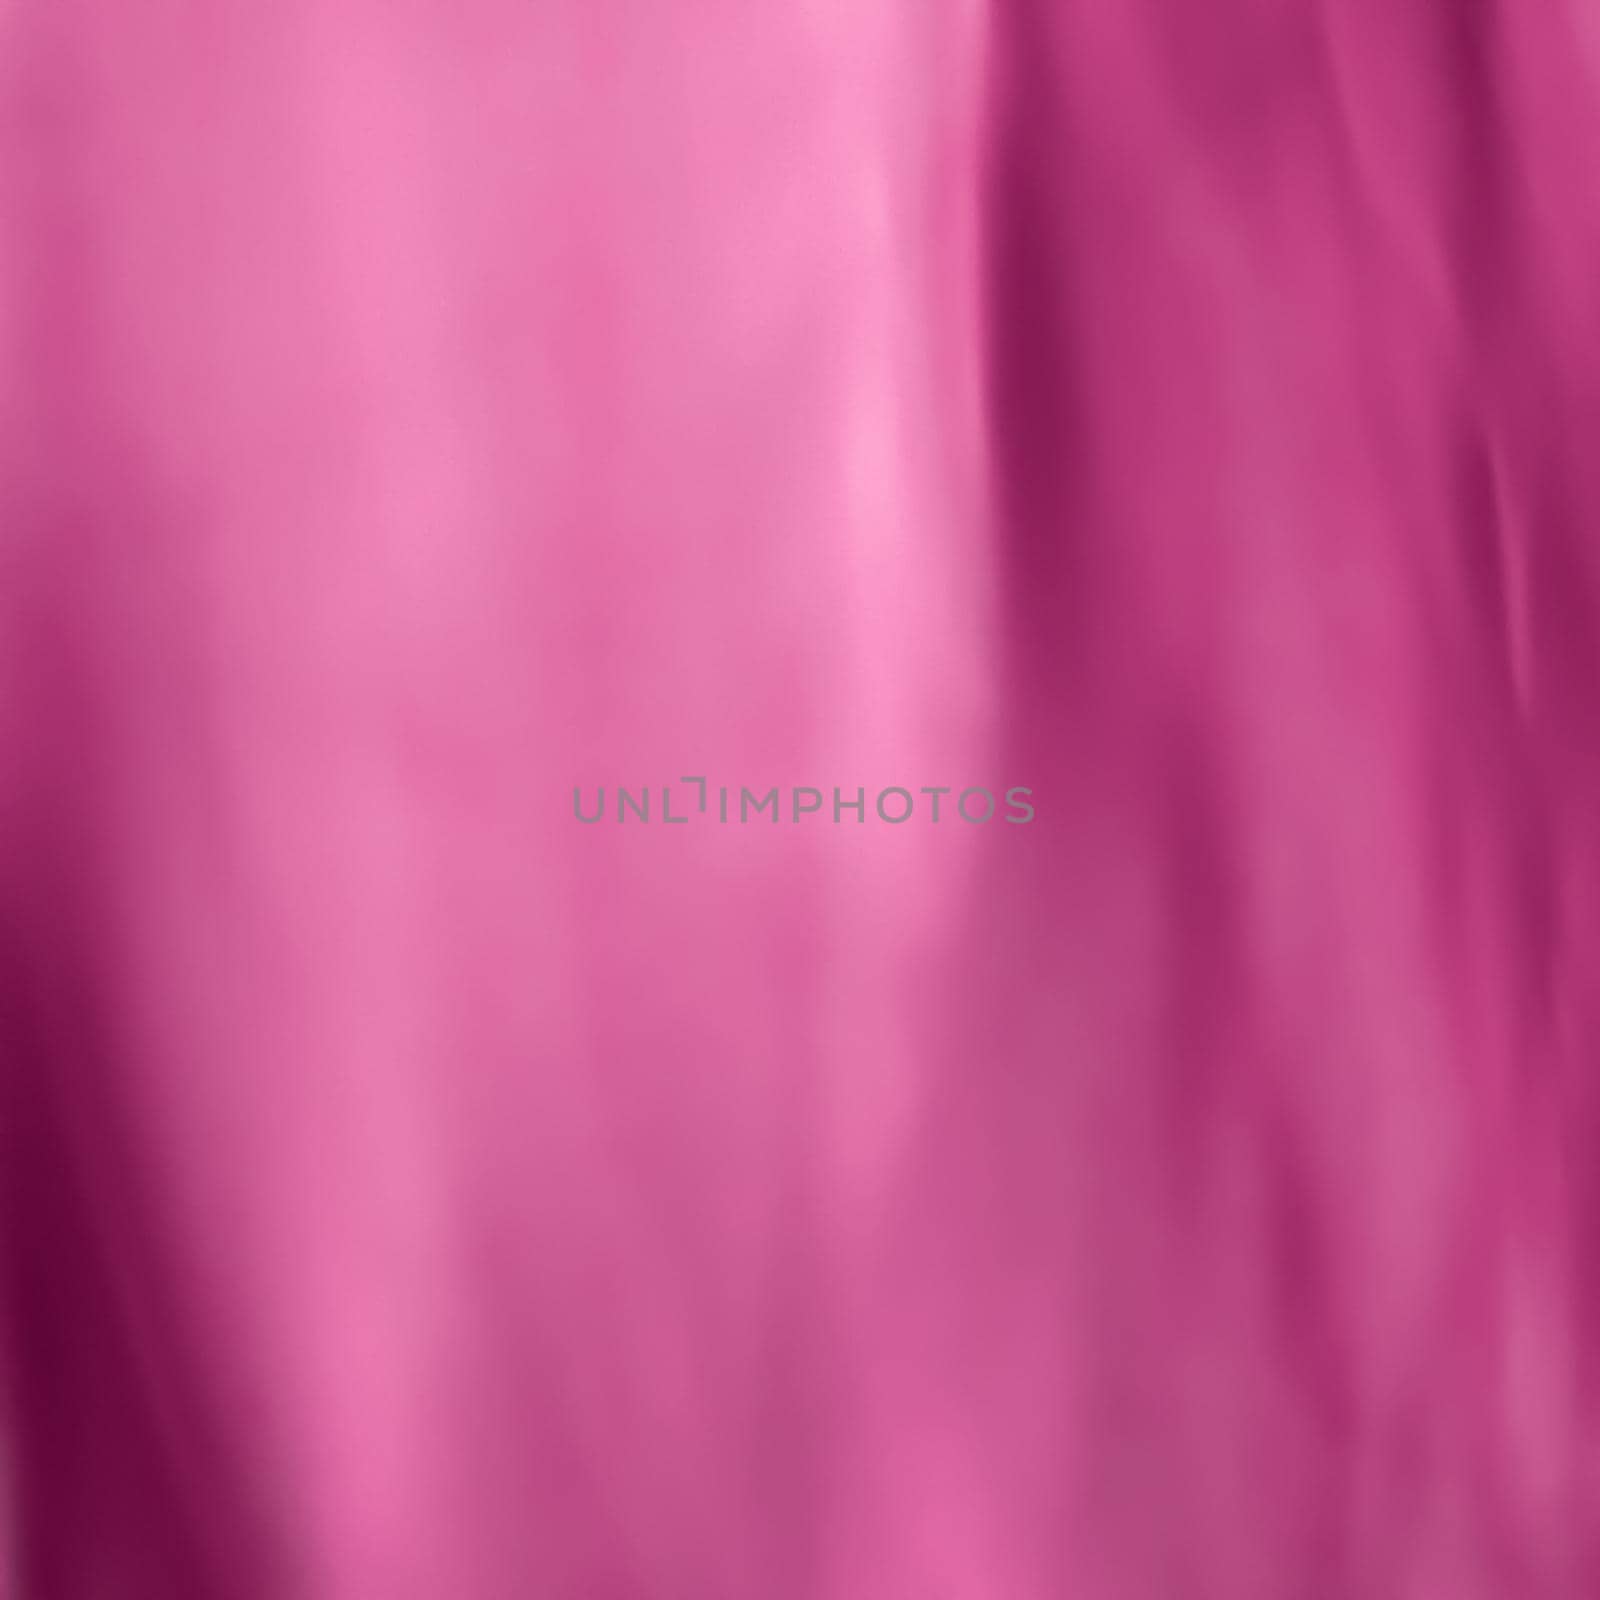 Holiday branding, beauty veil and glamour backdrop concept - Pink abstract art background, silk texture and wave lines in motion for classic luxury design